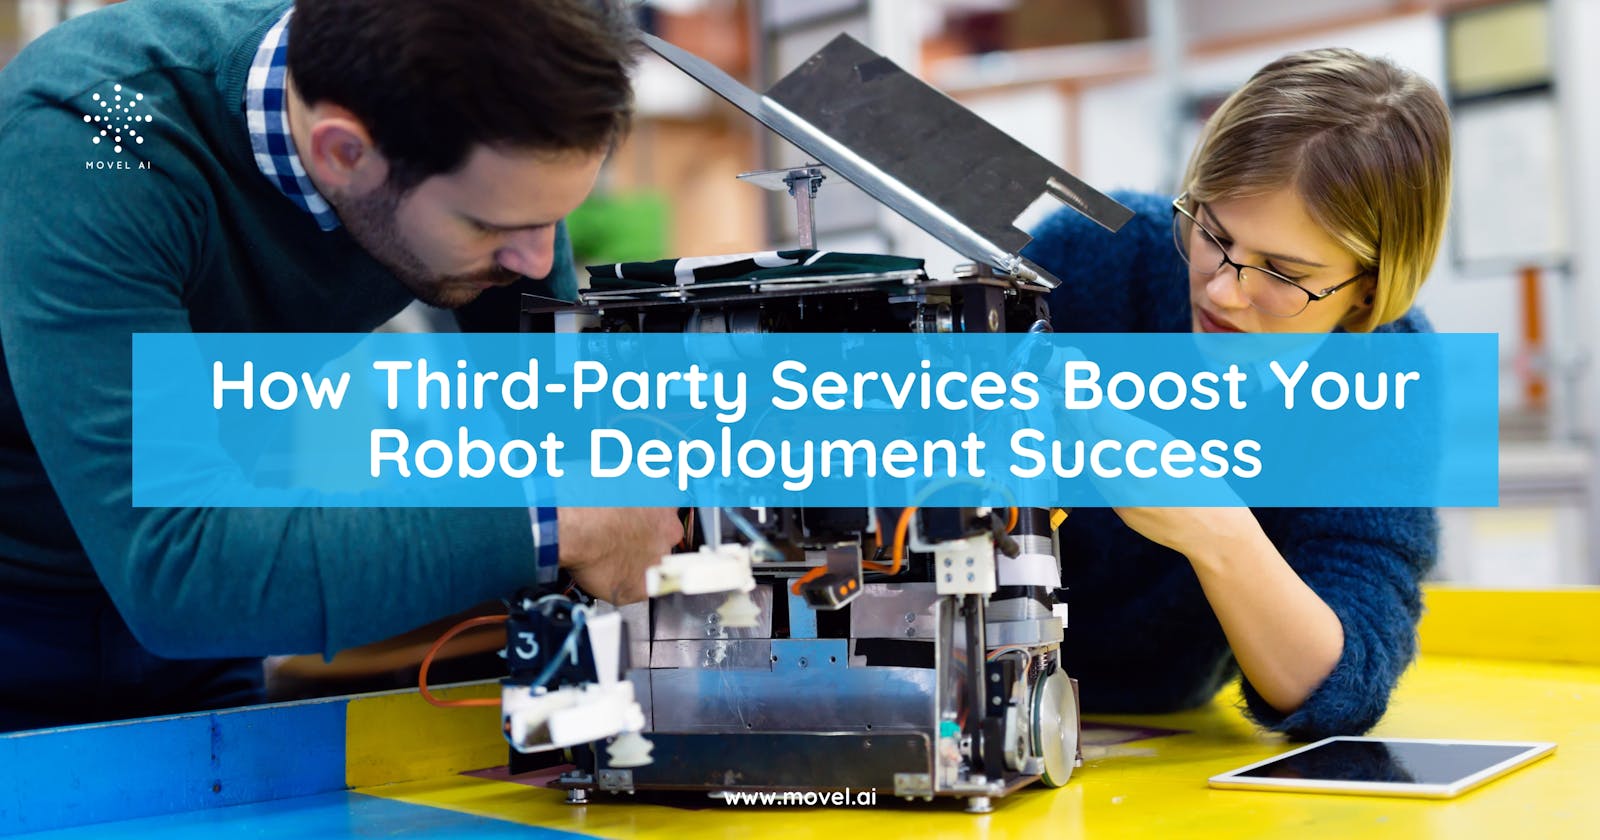 How Third-Party Services Boost Your Robot Deployment Success